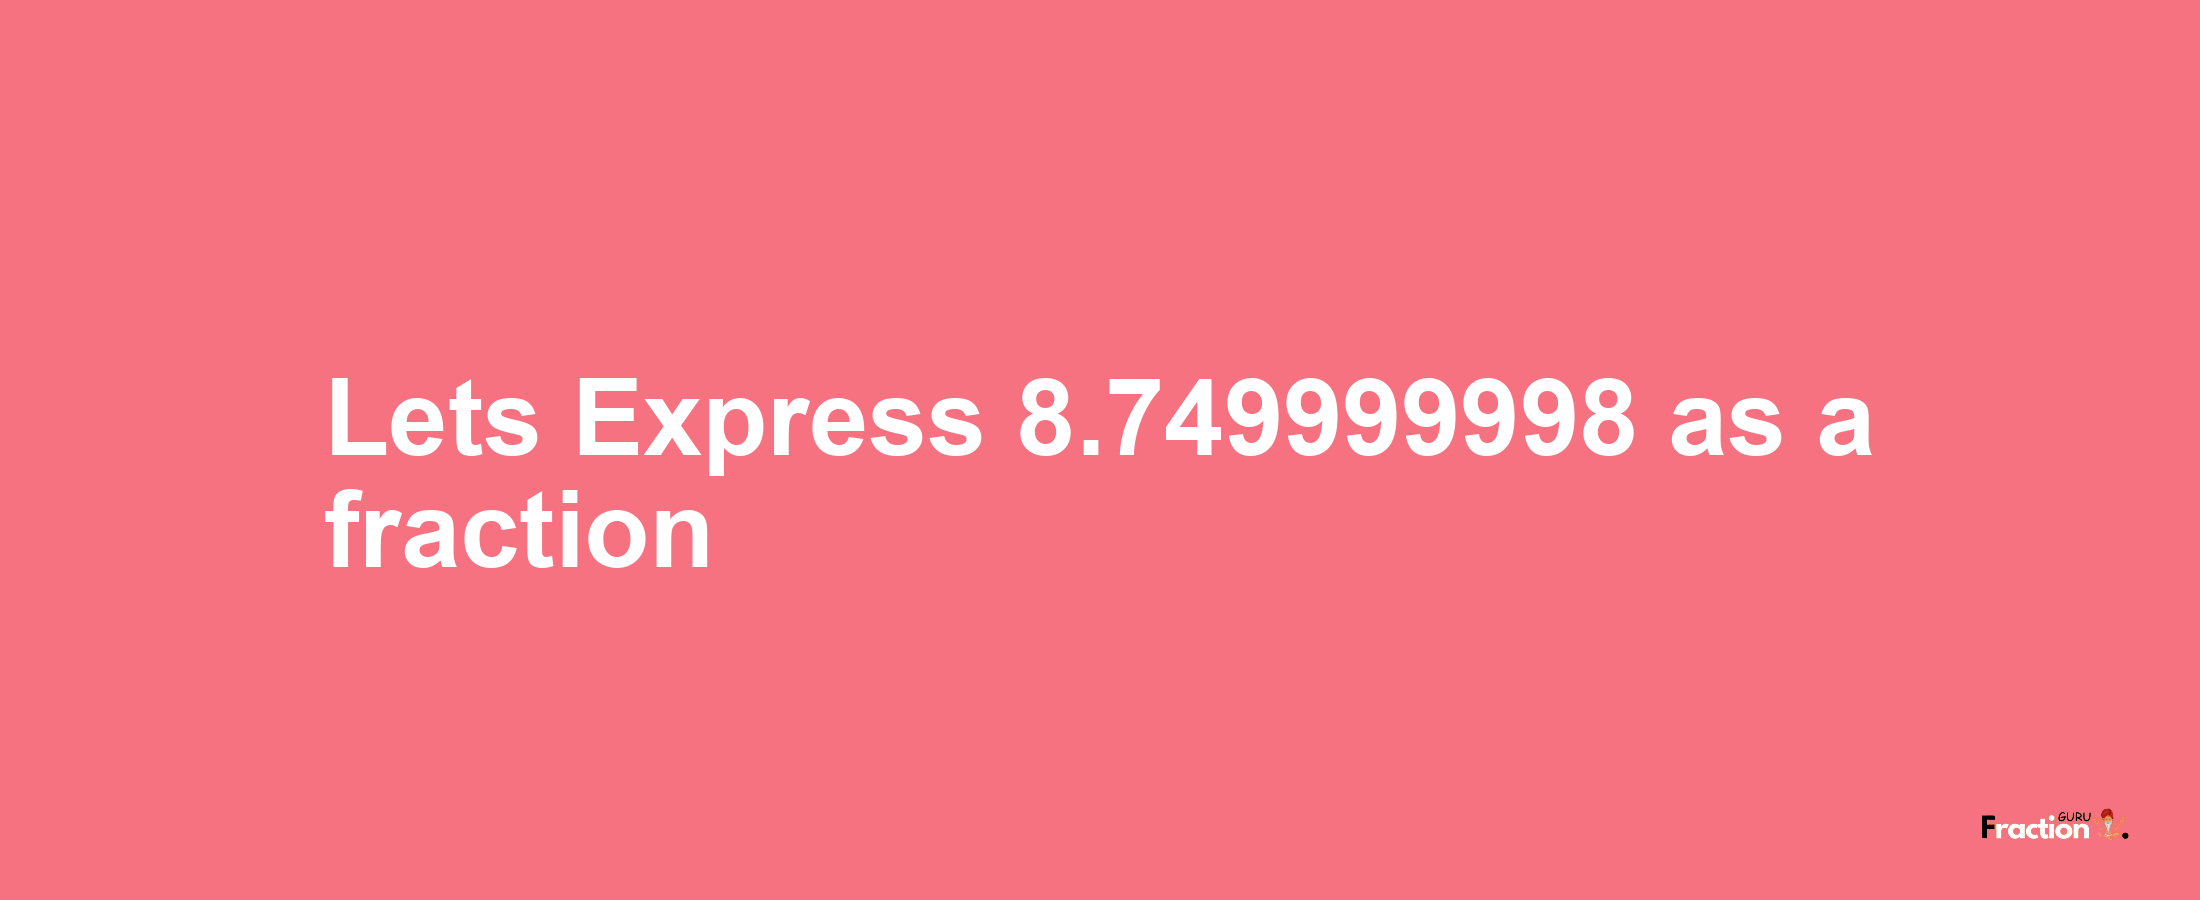 Lets Express 8.749999998 as afraction